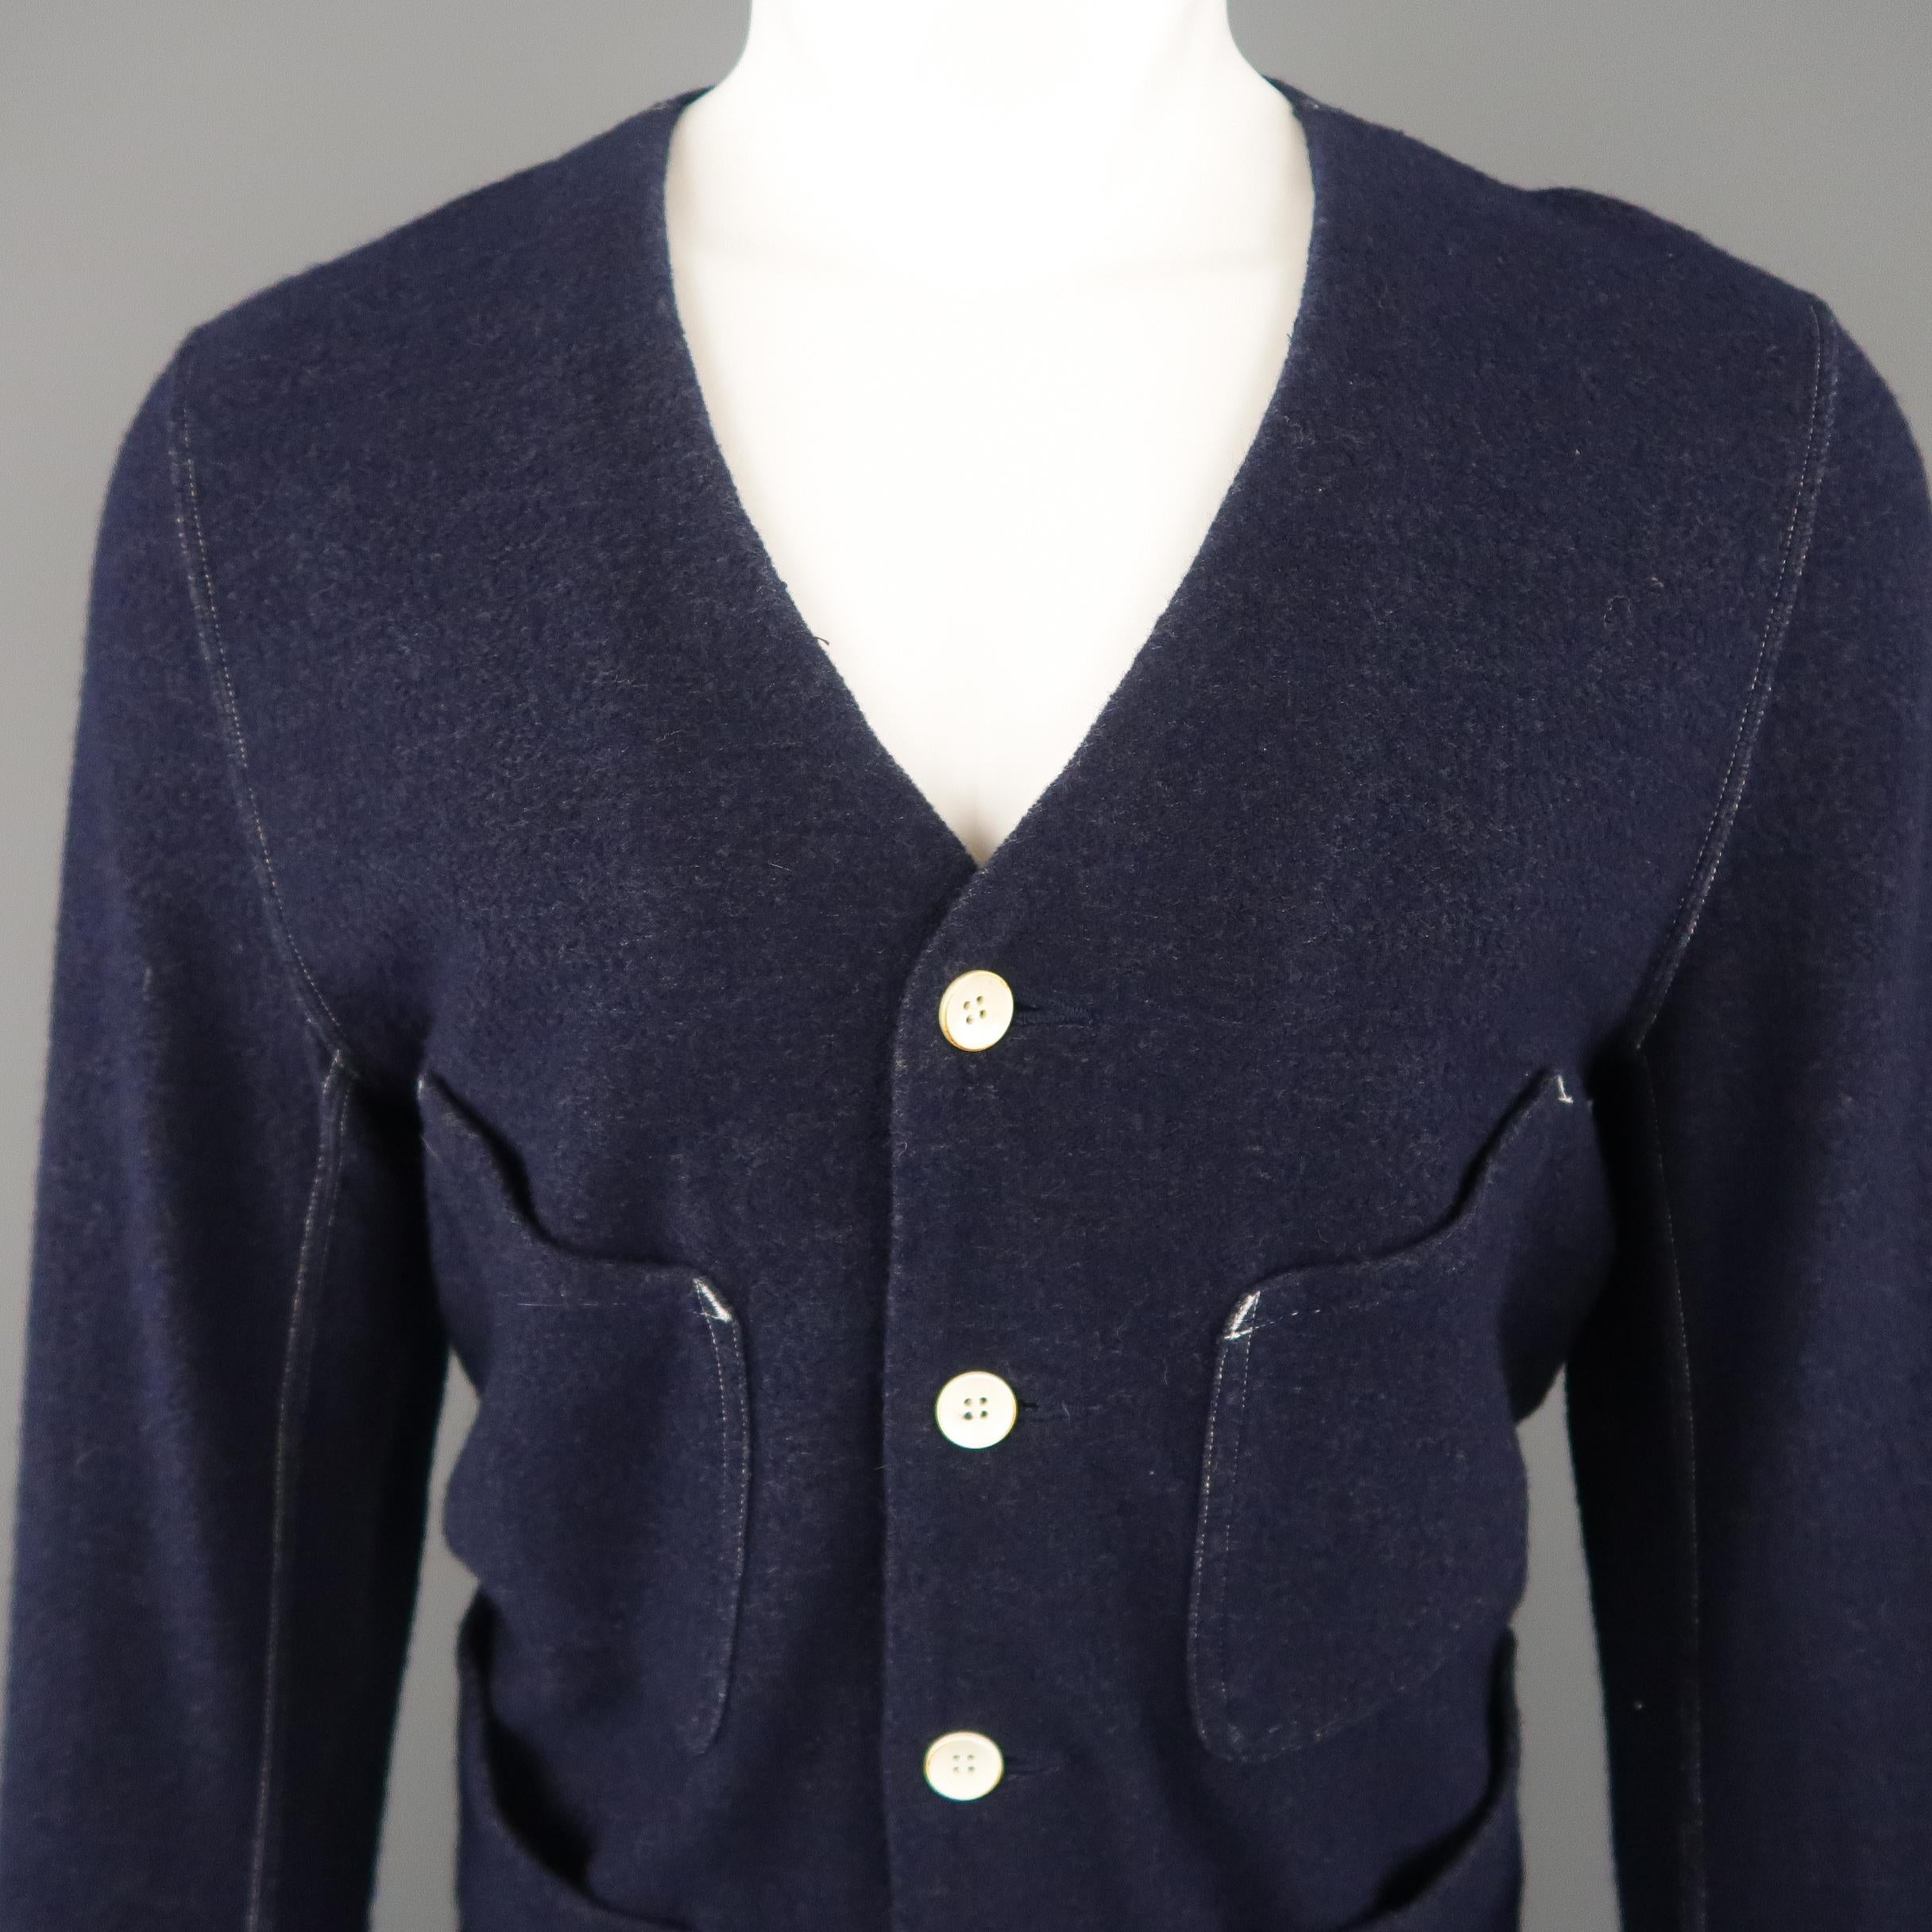 HAVER SACK  jacket comes in navy textured knit with a deep V neckline, patch pockets, and contrast stitching throughout. Made in Japan.
 
Excellent Pre-Owned Condition.
Marked: M
 
Measurements:
 
Shoulder: 18 in.
Chest: 42 in.
Sleeve: 26